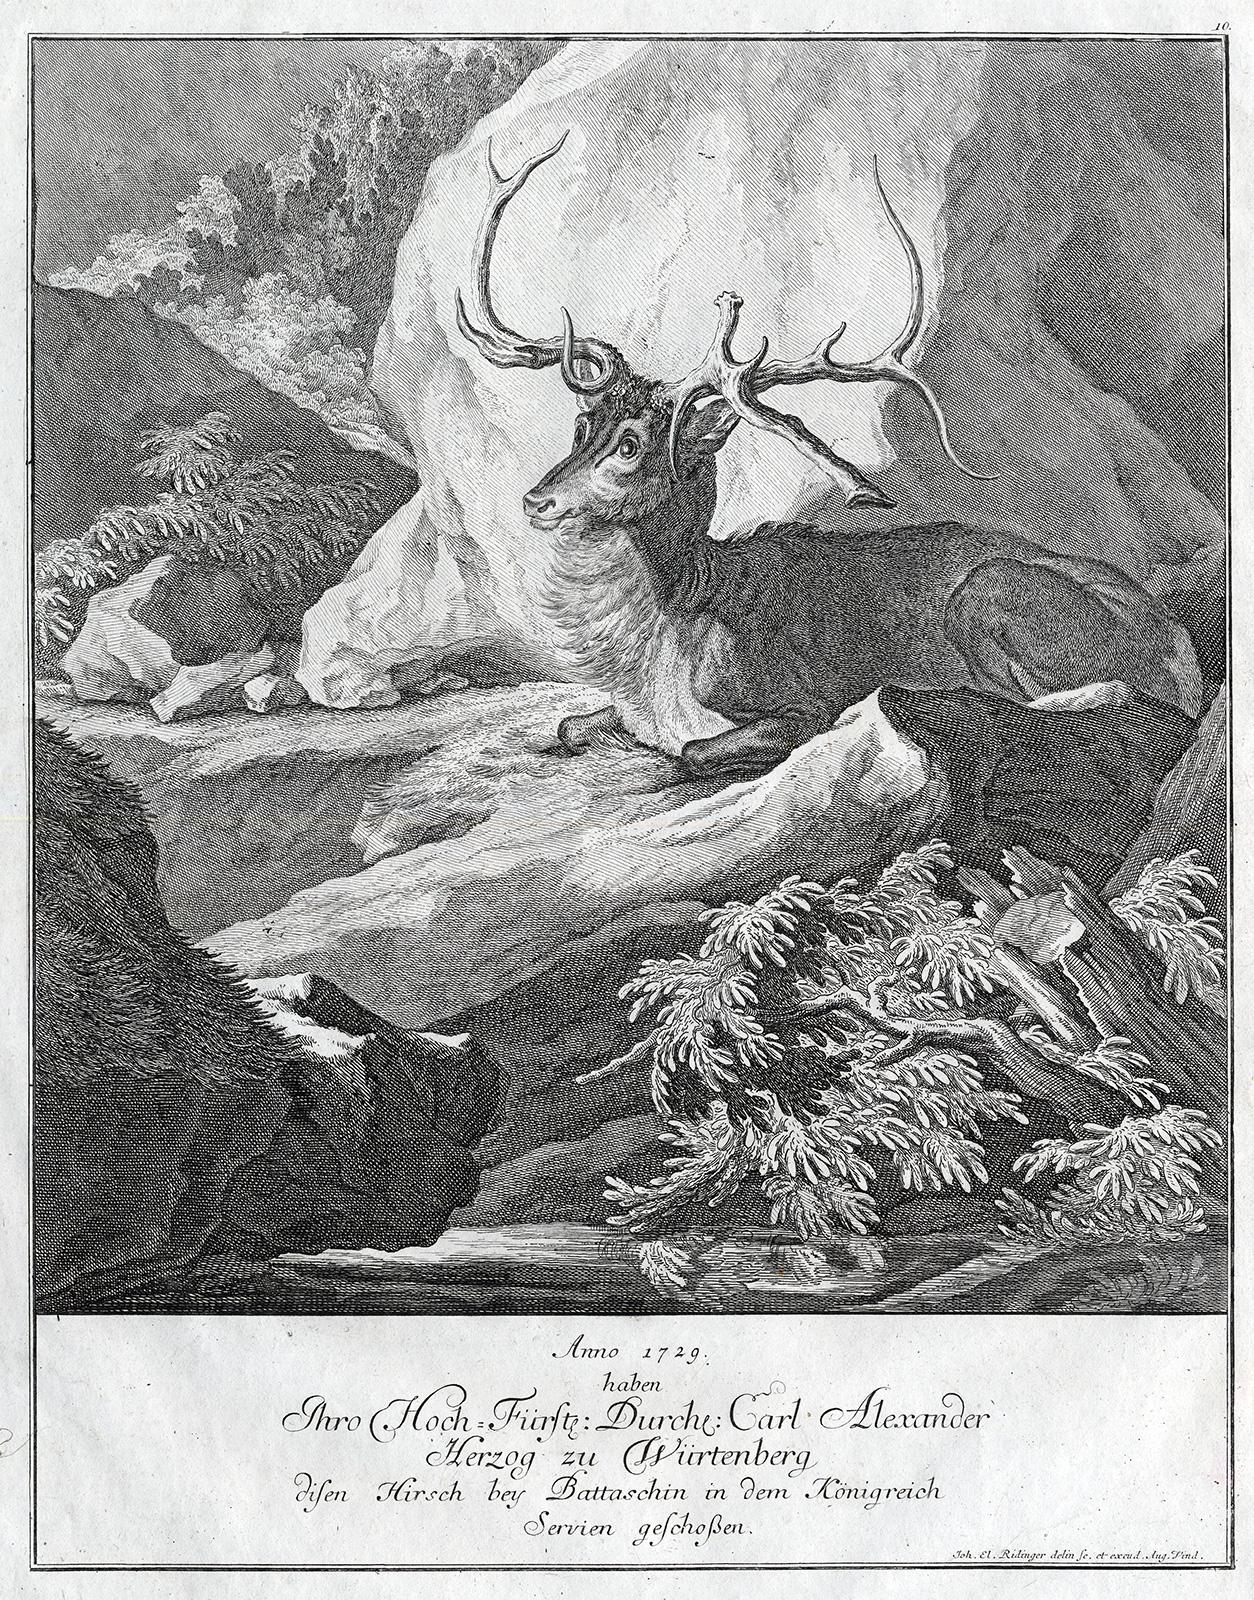 Martin Elias Ridinger Landscape Print - Hunting scene print with a deer shot in Serbia by Ridinger - Engraving - 18th c